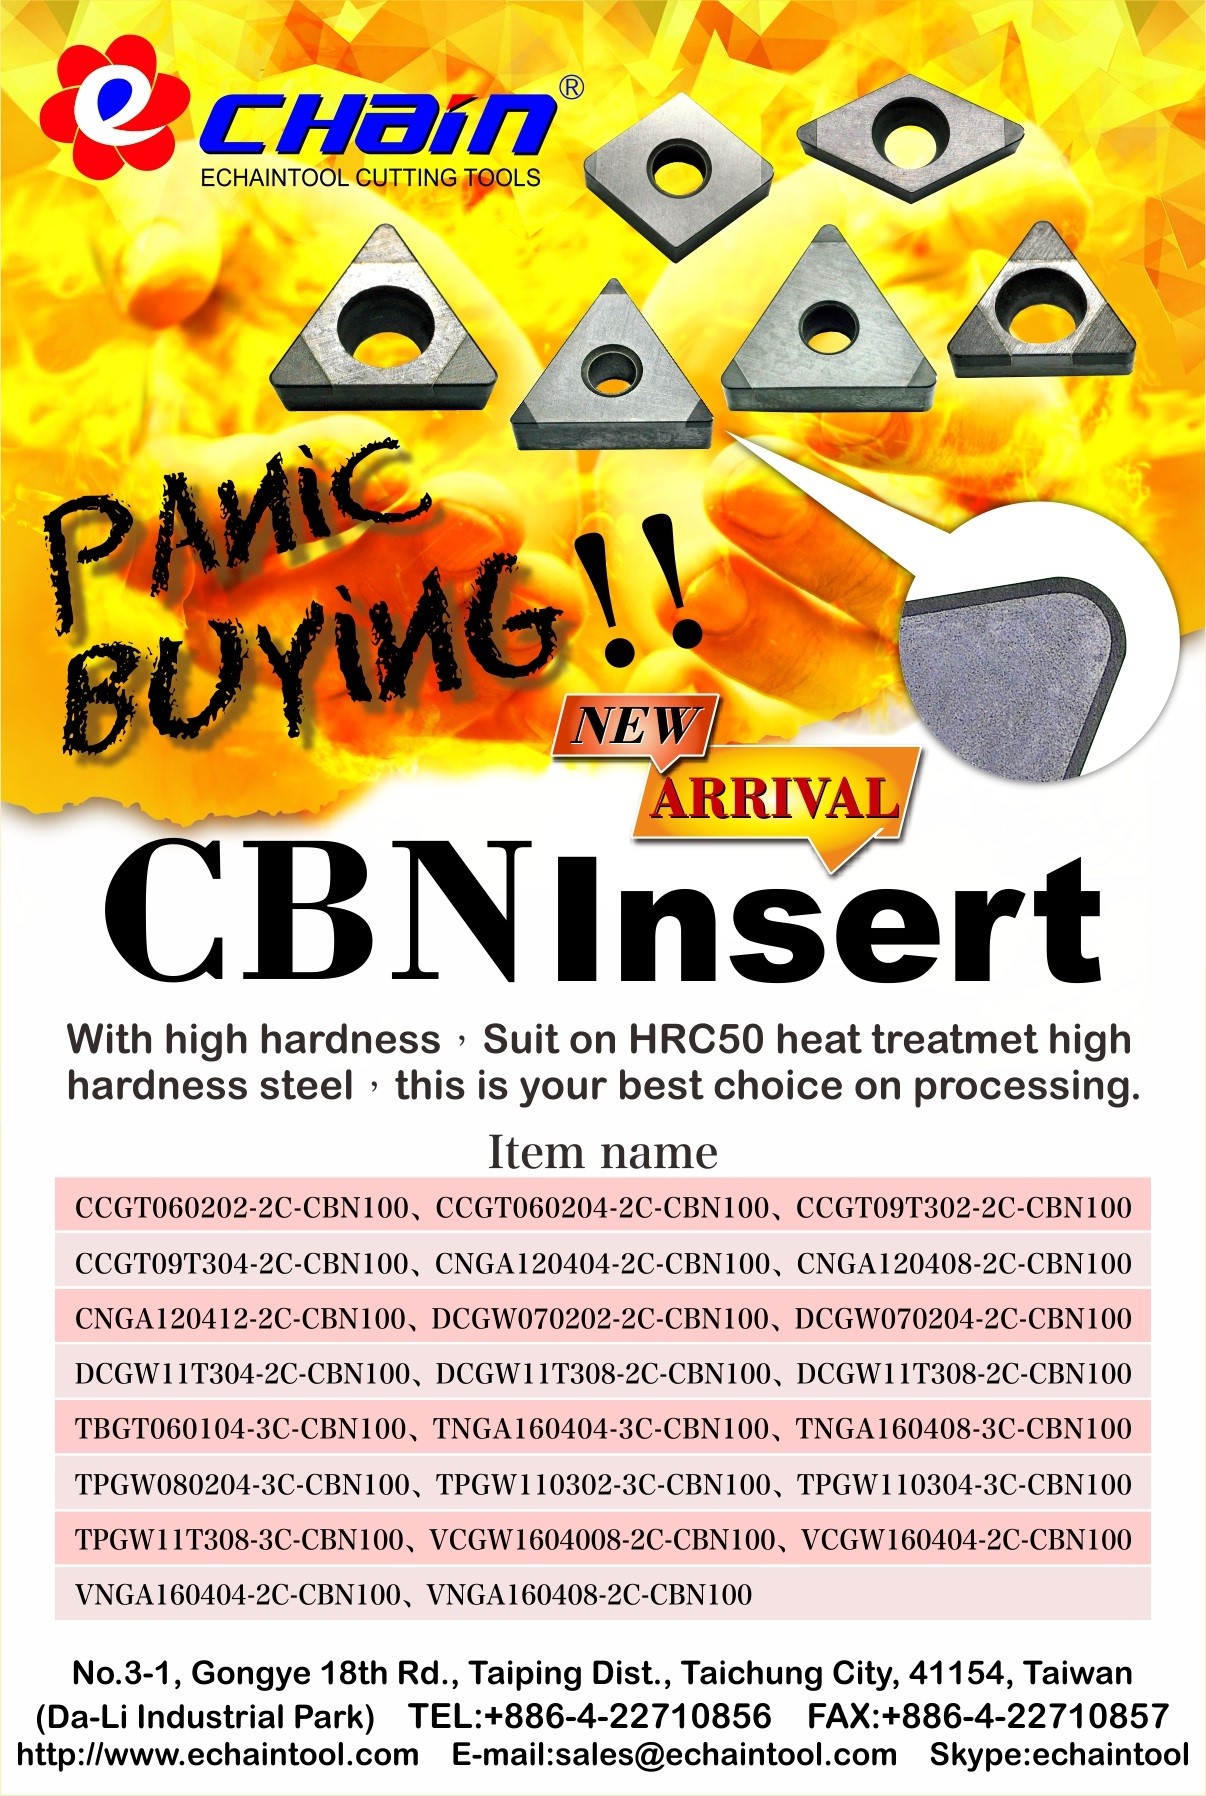 CNB inserts made in Taiwan for hard metal turning